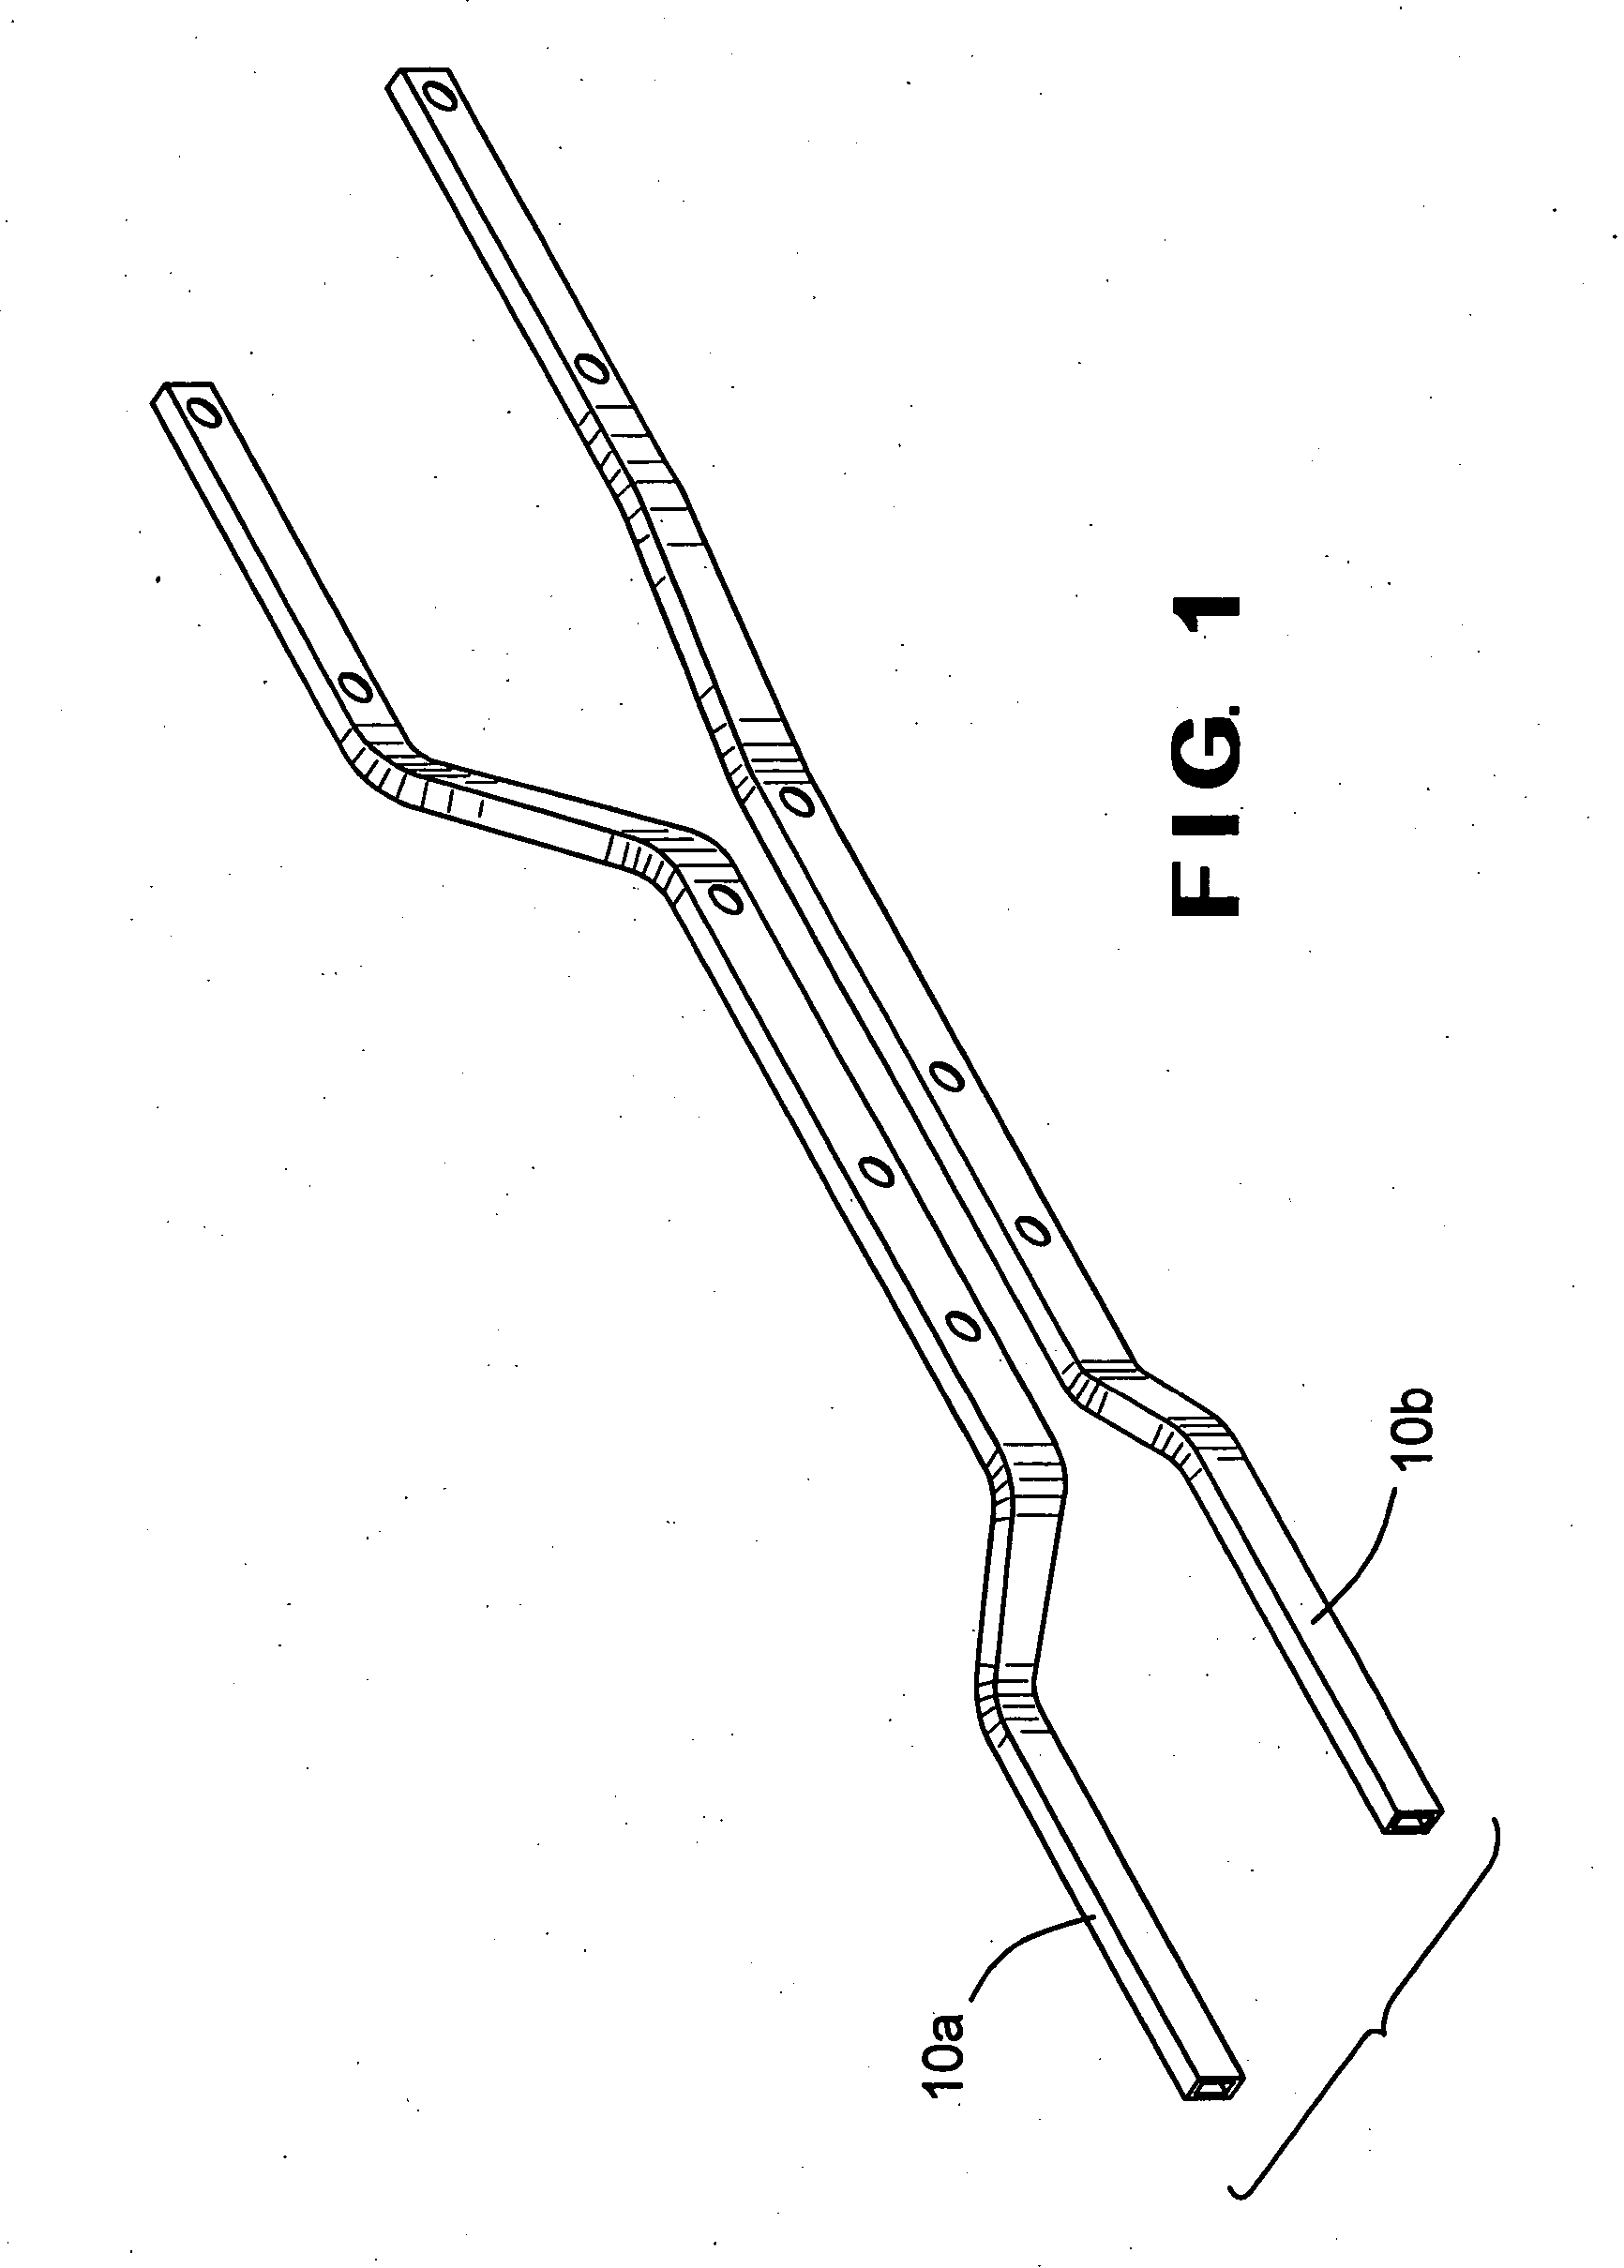 Method of manufacturing a frame assembly